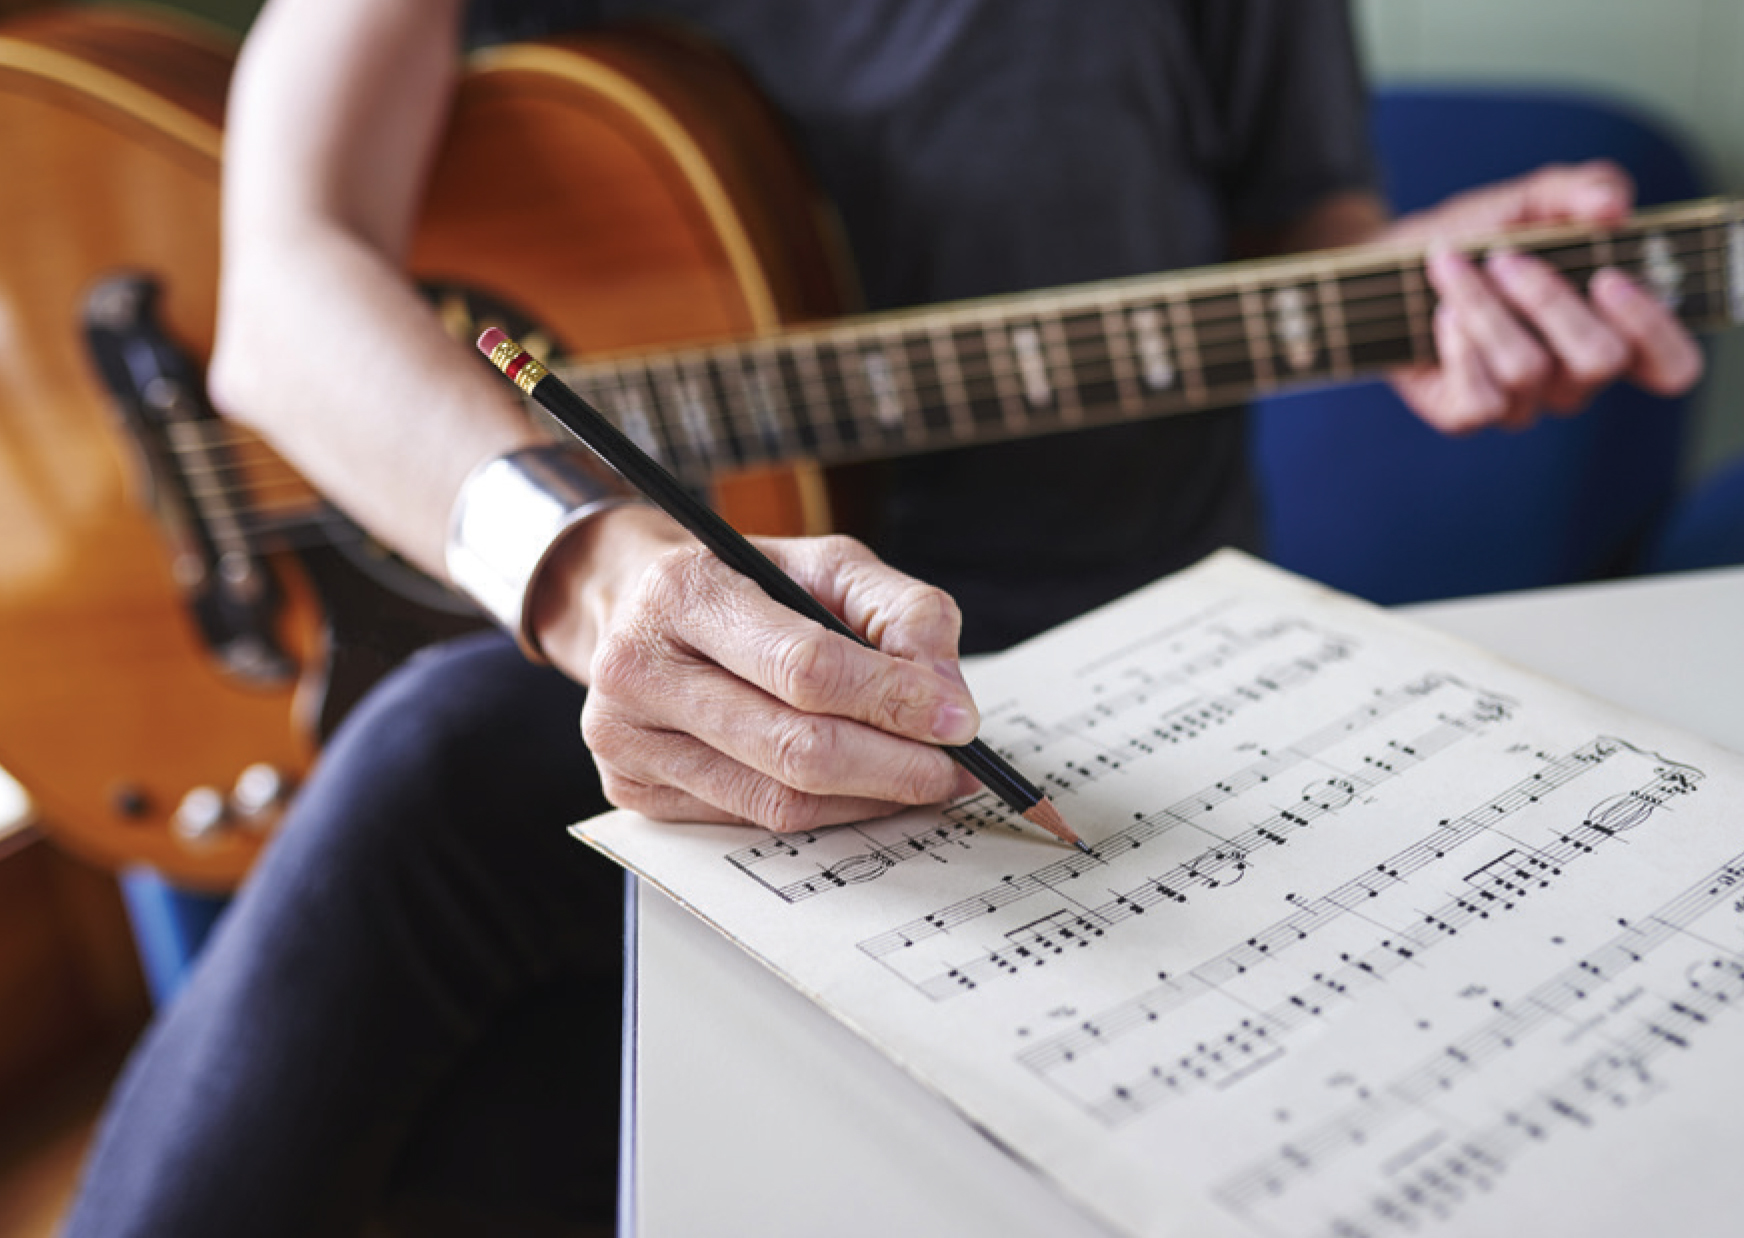 Musician with guitar writing musical notation